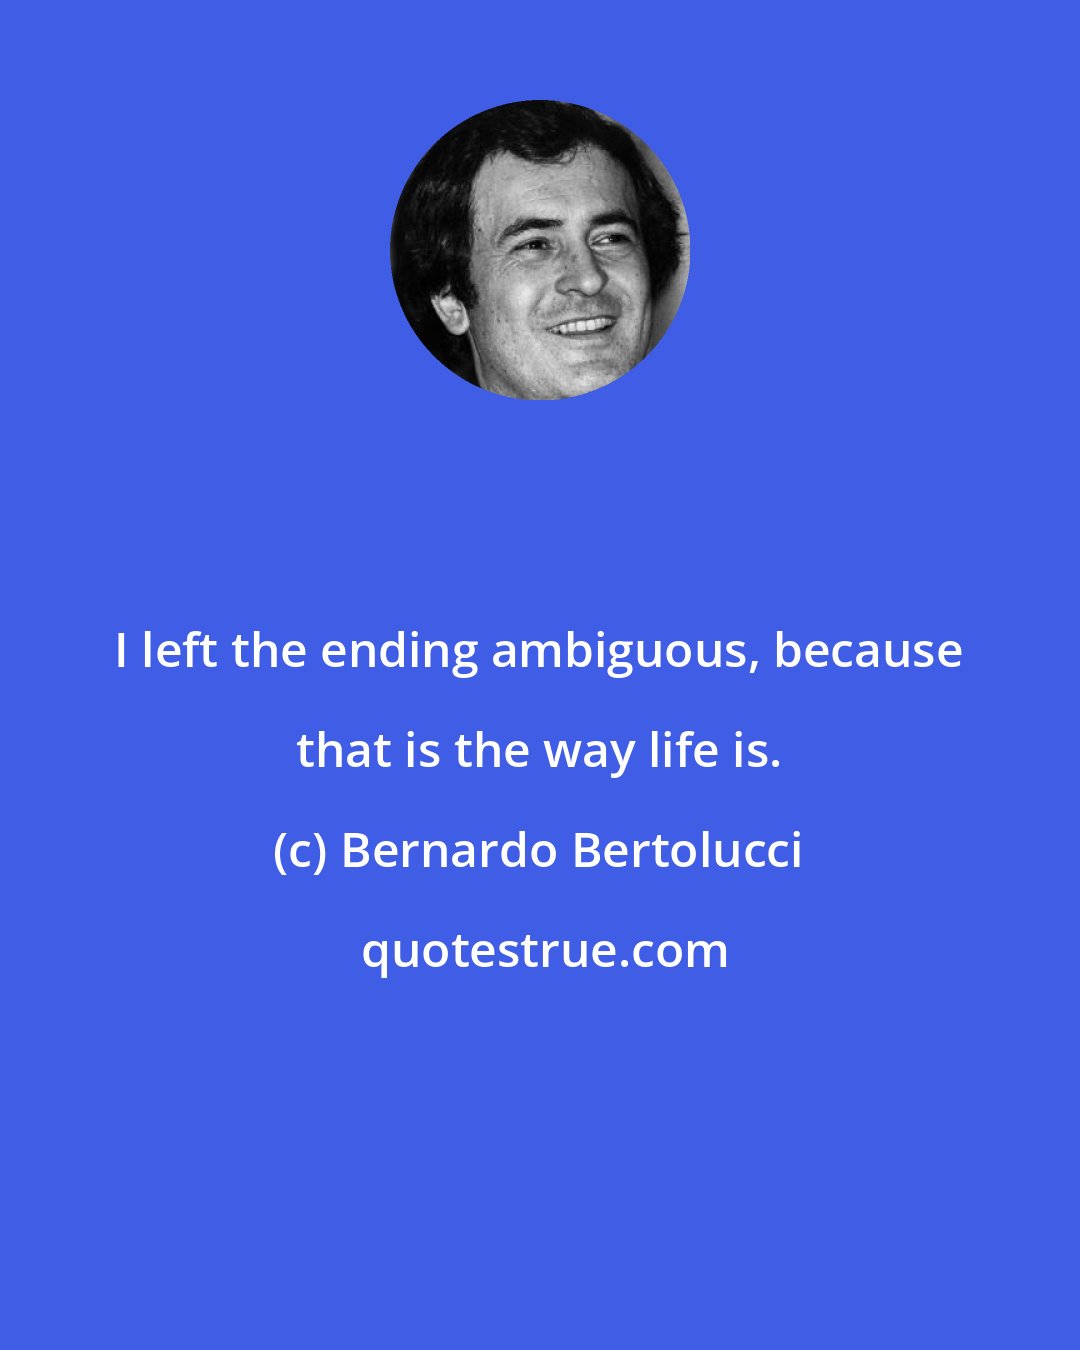 Bernardo Bertolucci: I left the ending ambiguous, because that is the way life is.